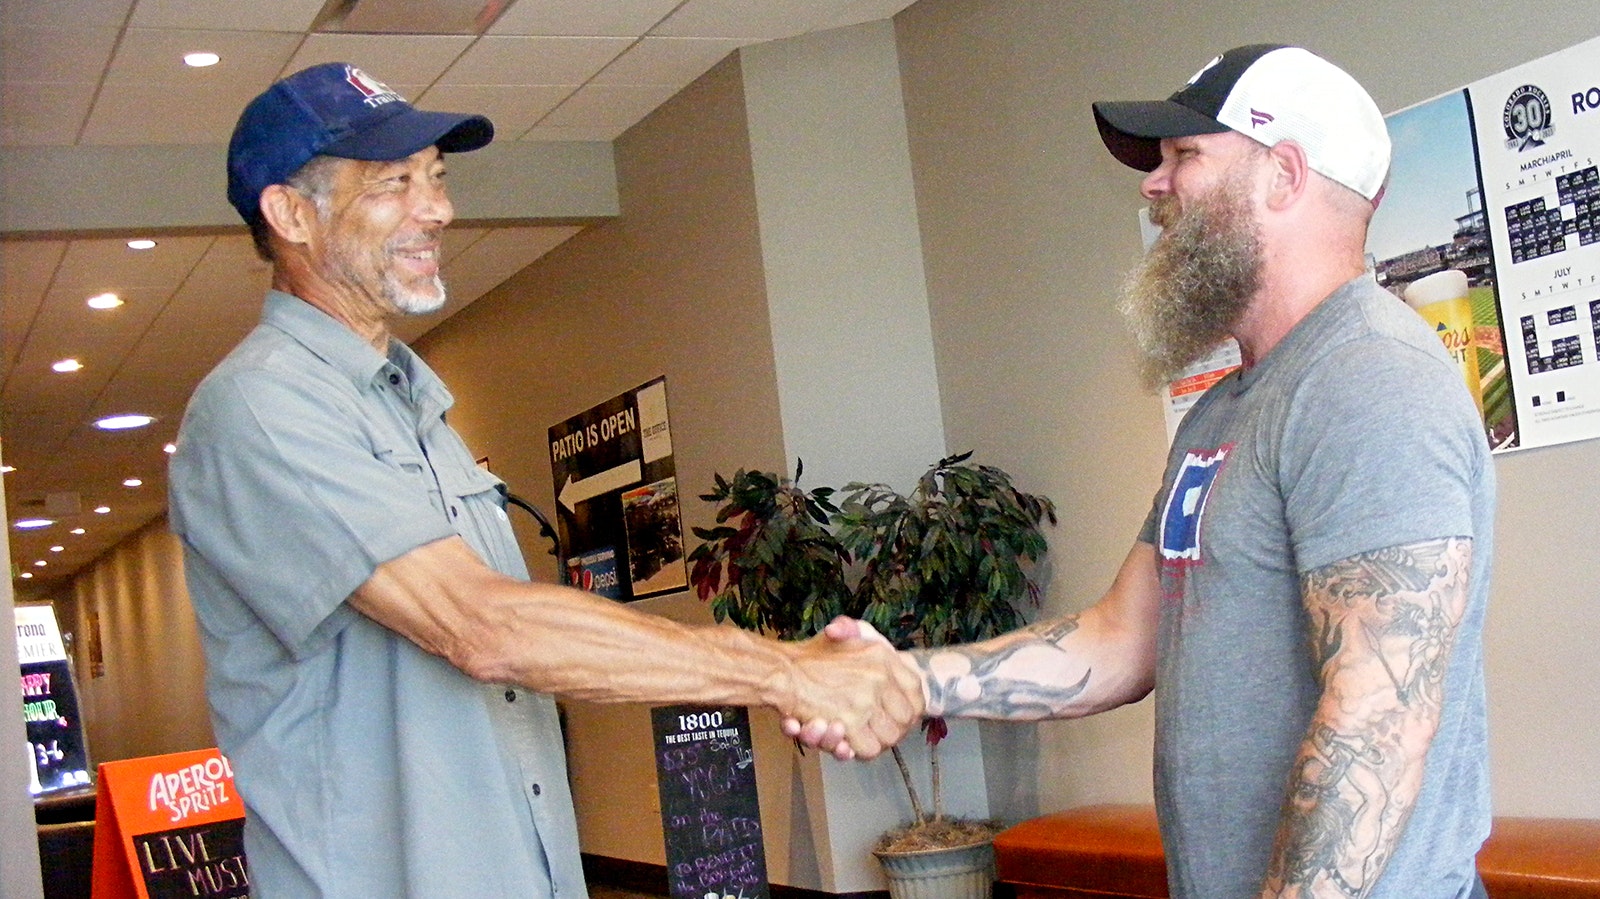 Tom Hutchings, left, meets John Ysebaert, one of the men who saved his life after she suffered from cardiac arrest while driving on Interstate 25.